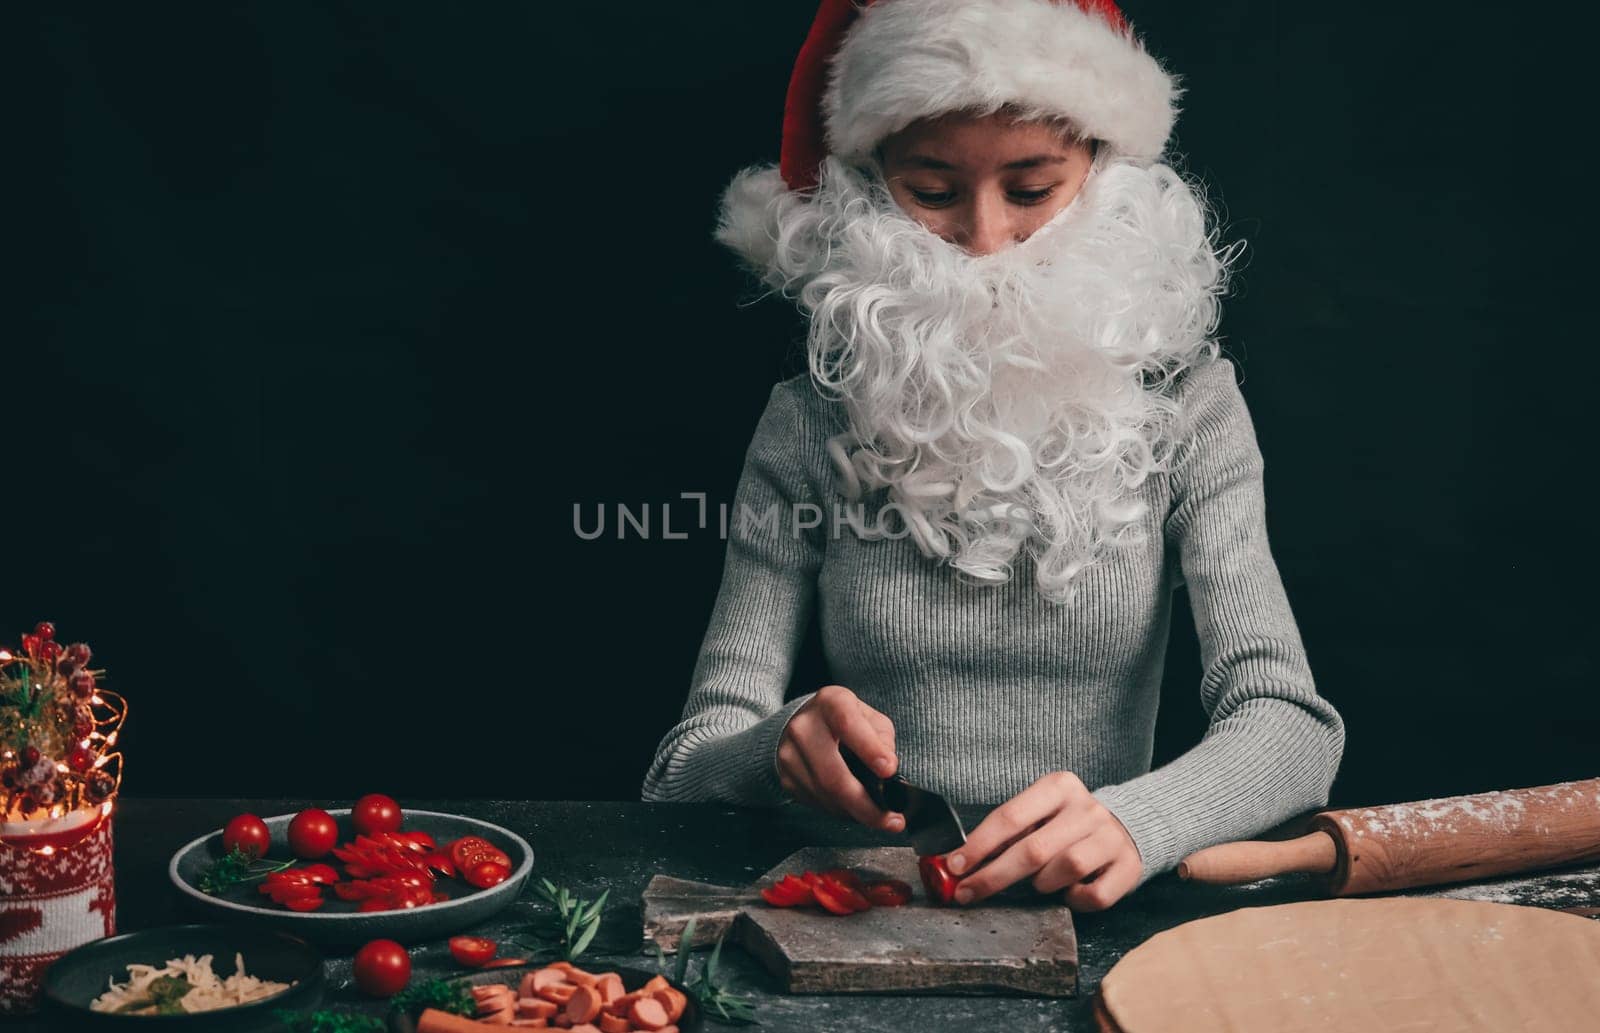 Caucasian teenage girl in a santa hat with a beard cuts with a big black knife cherry tomatoes on a gray wooden board, next to pizza dough, rolling pin and Christmas decor on a dark background, close-up side view. Cooking concept.